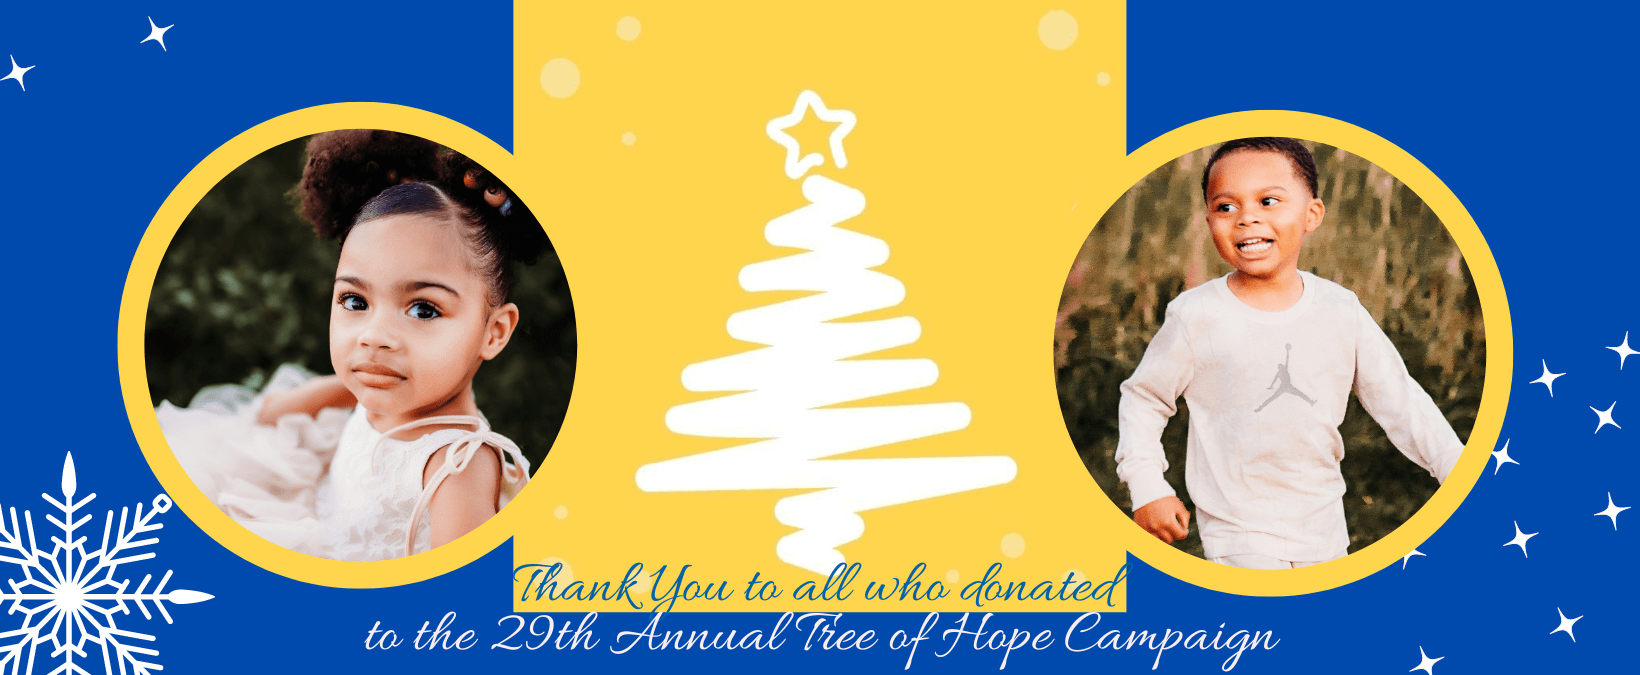 Thank you to all who donated to the 29th Tree of Hope Campaign!